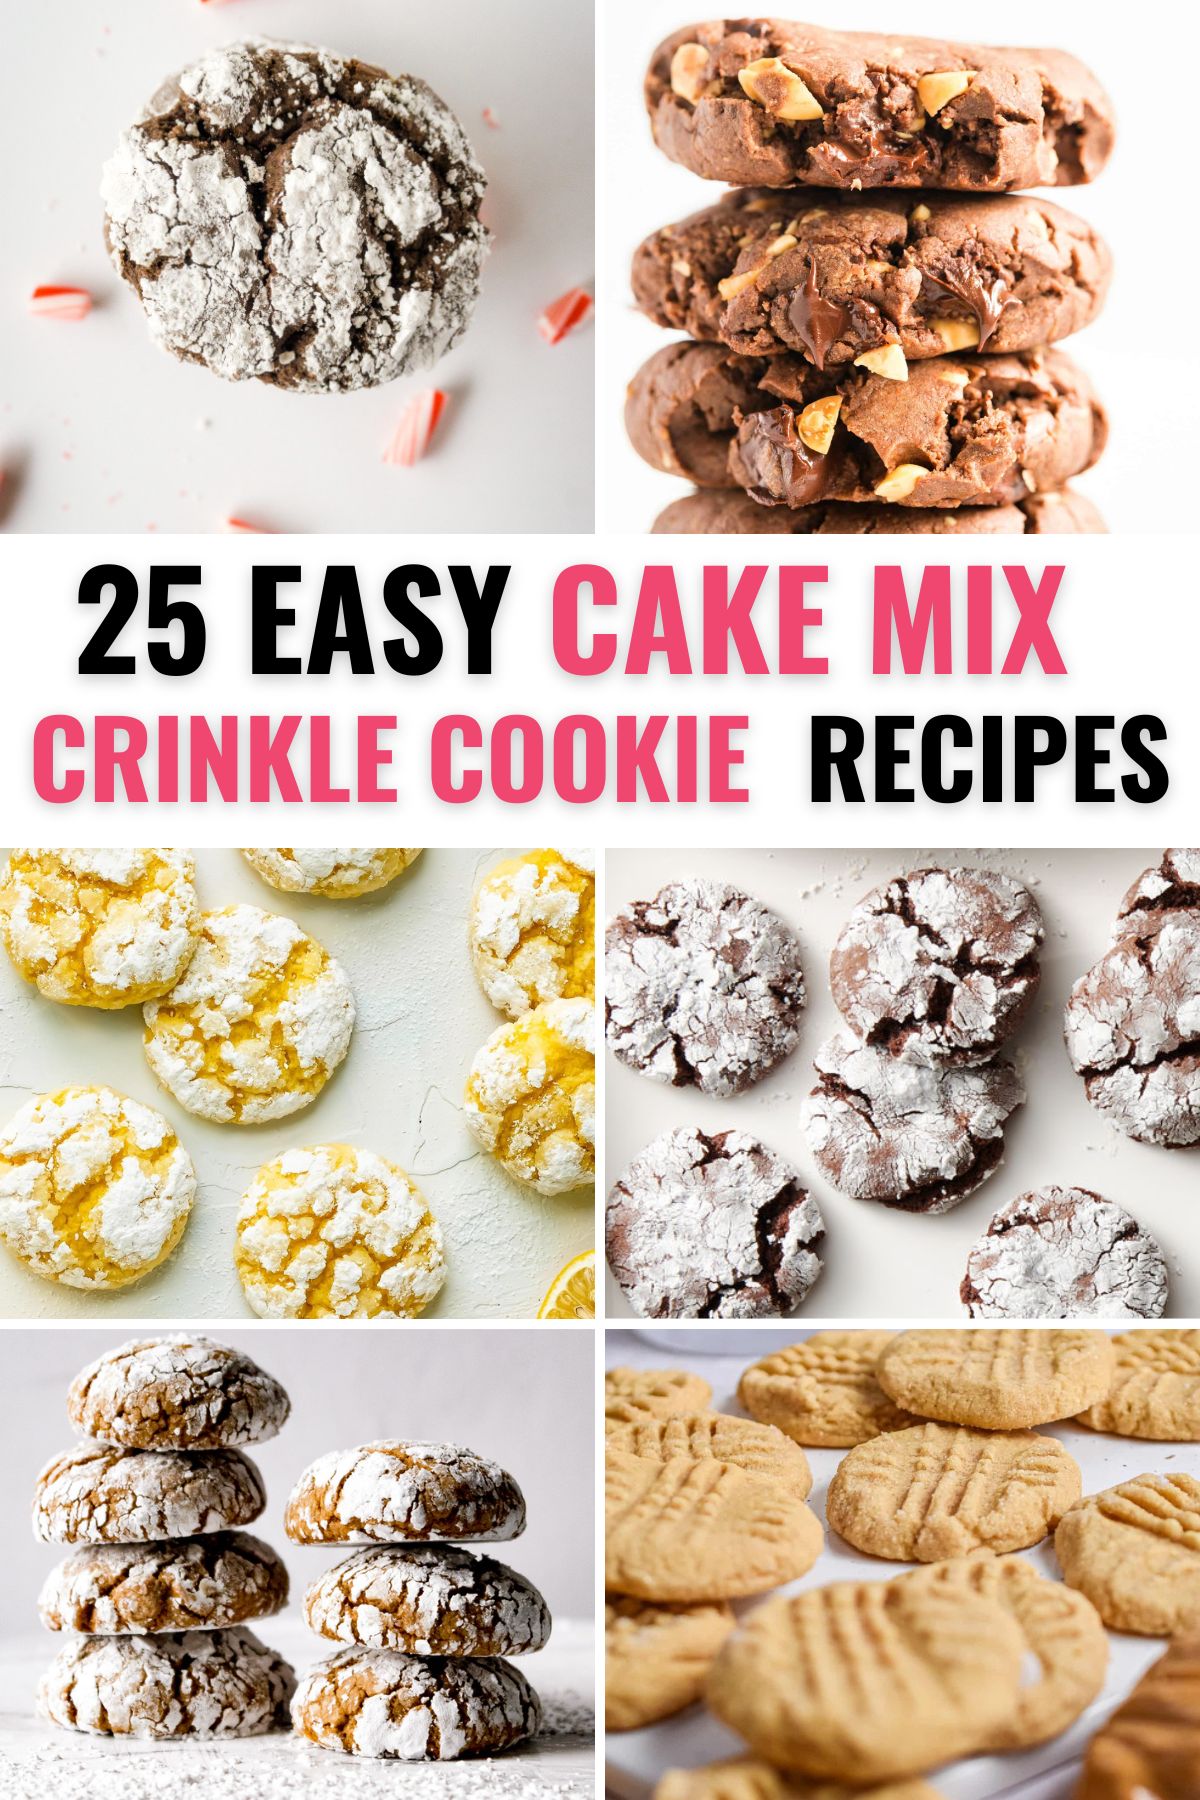 A collection of cake mix crinkle cookies